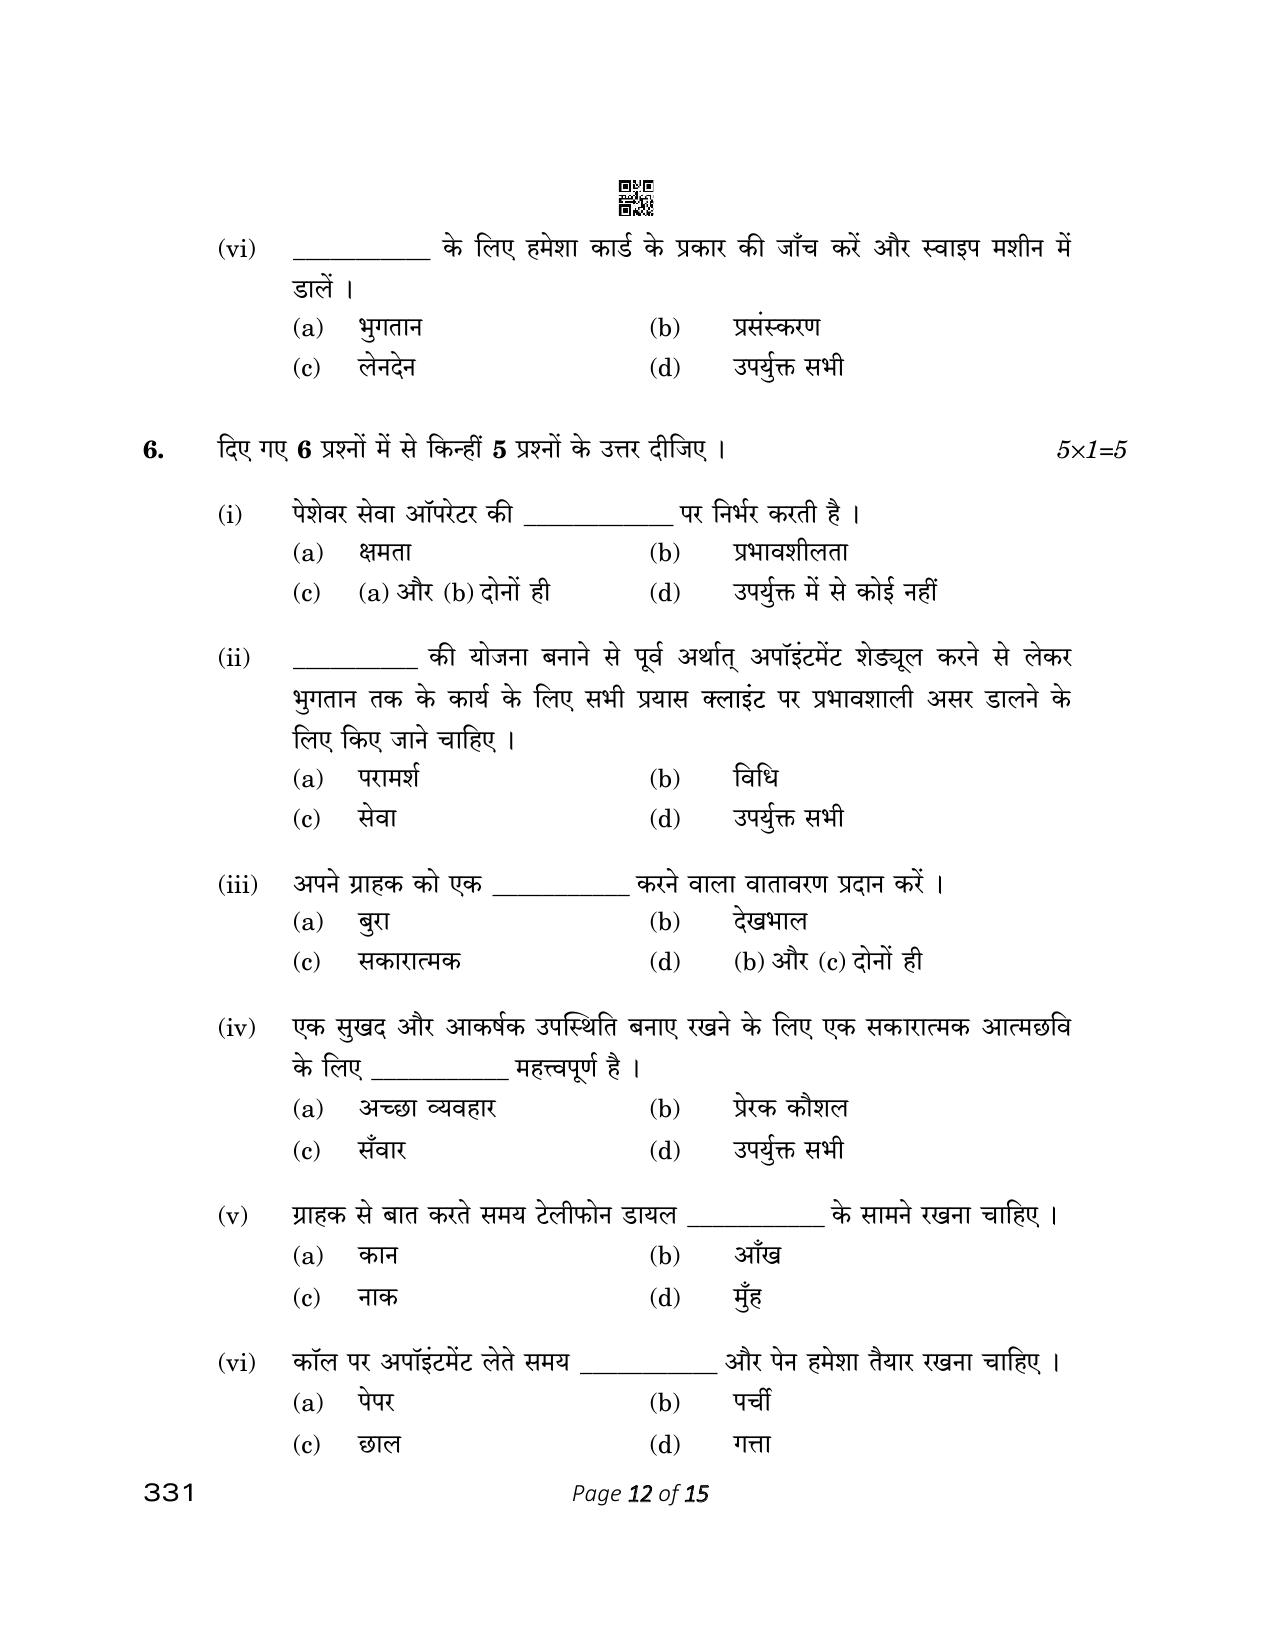 CBSE Class 12 331 Beauty And Wellness 2023 Question Paper - Page 12